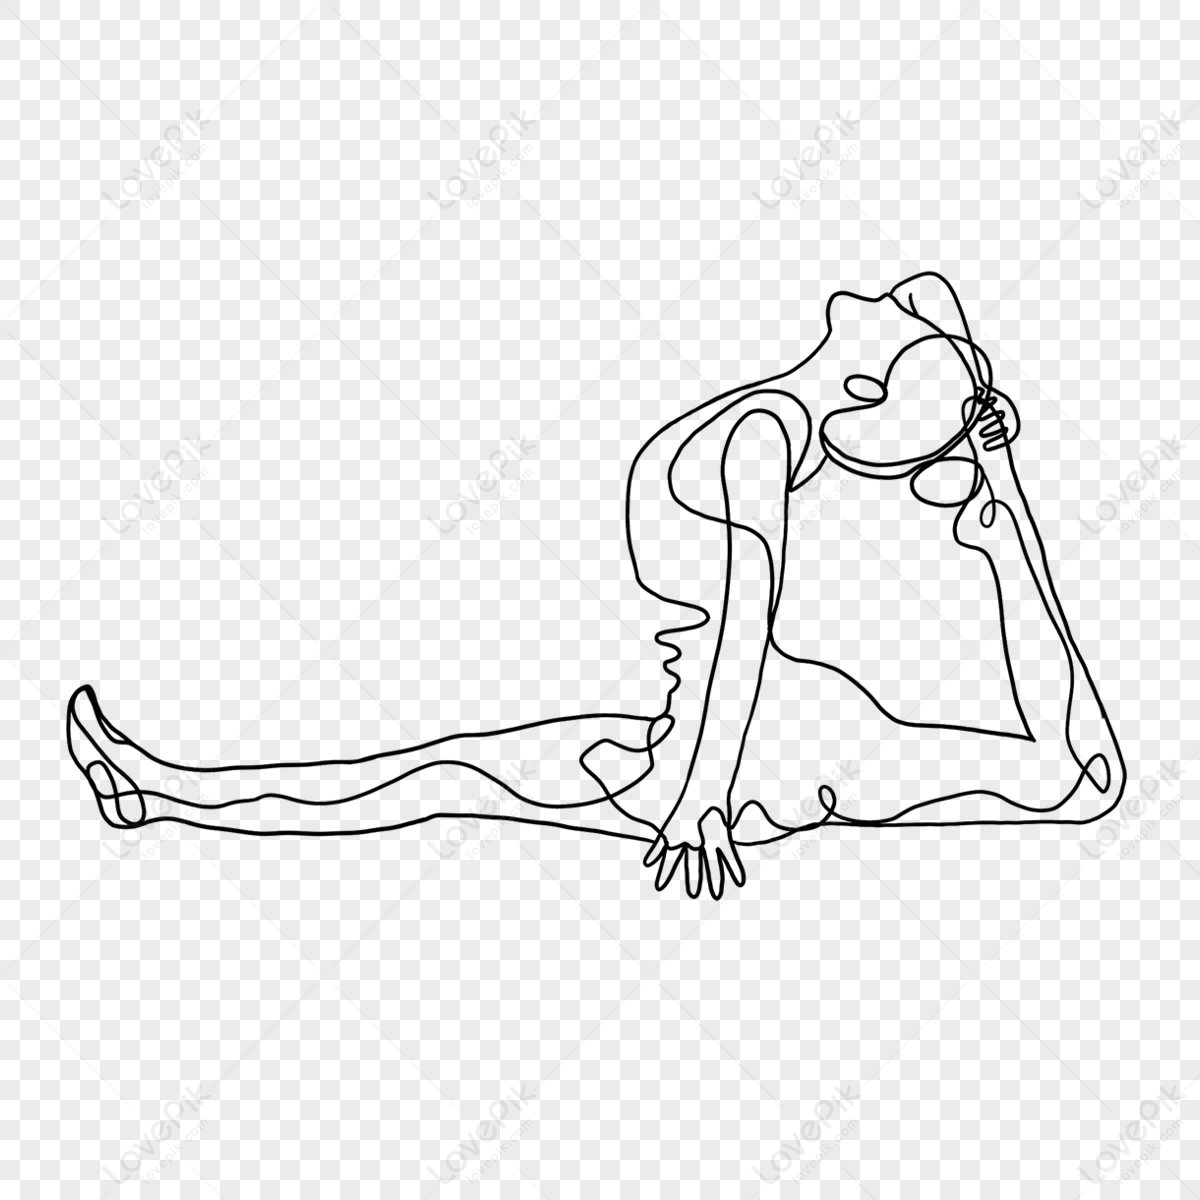 Yoga Poses Line Drawing Stock Illustrations – 268 Yoga Poses Line Drawing  Stock Illustrations, Vectors & Clipart - Dreamstime